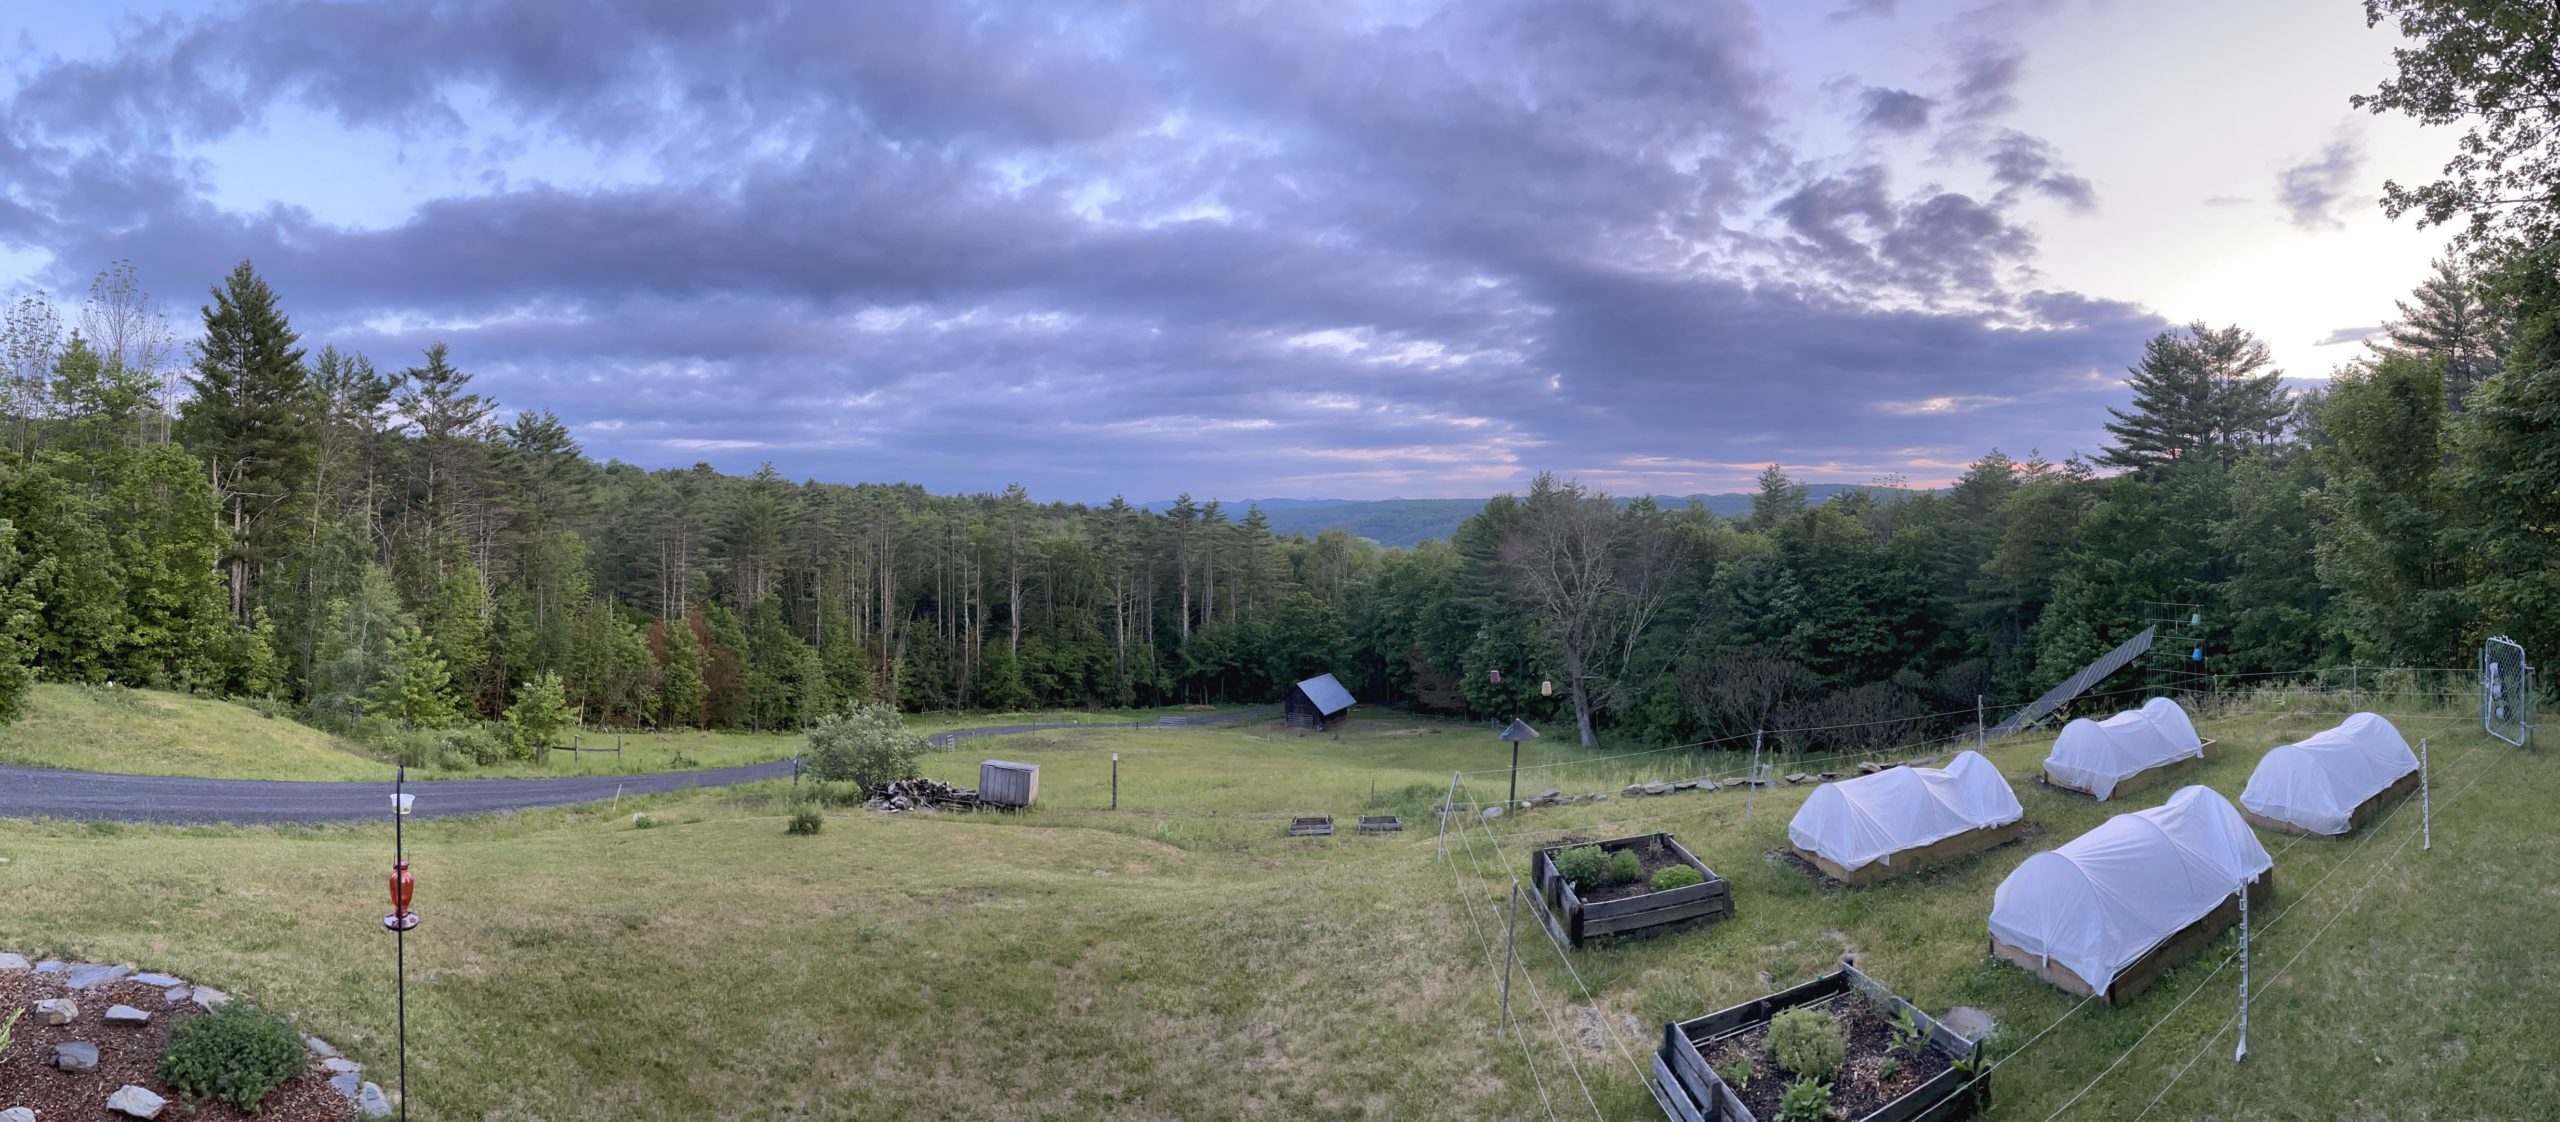 A panoramic photo taken from our front porch with lots of clouds, sky and trees.